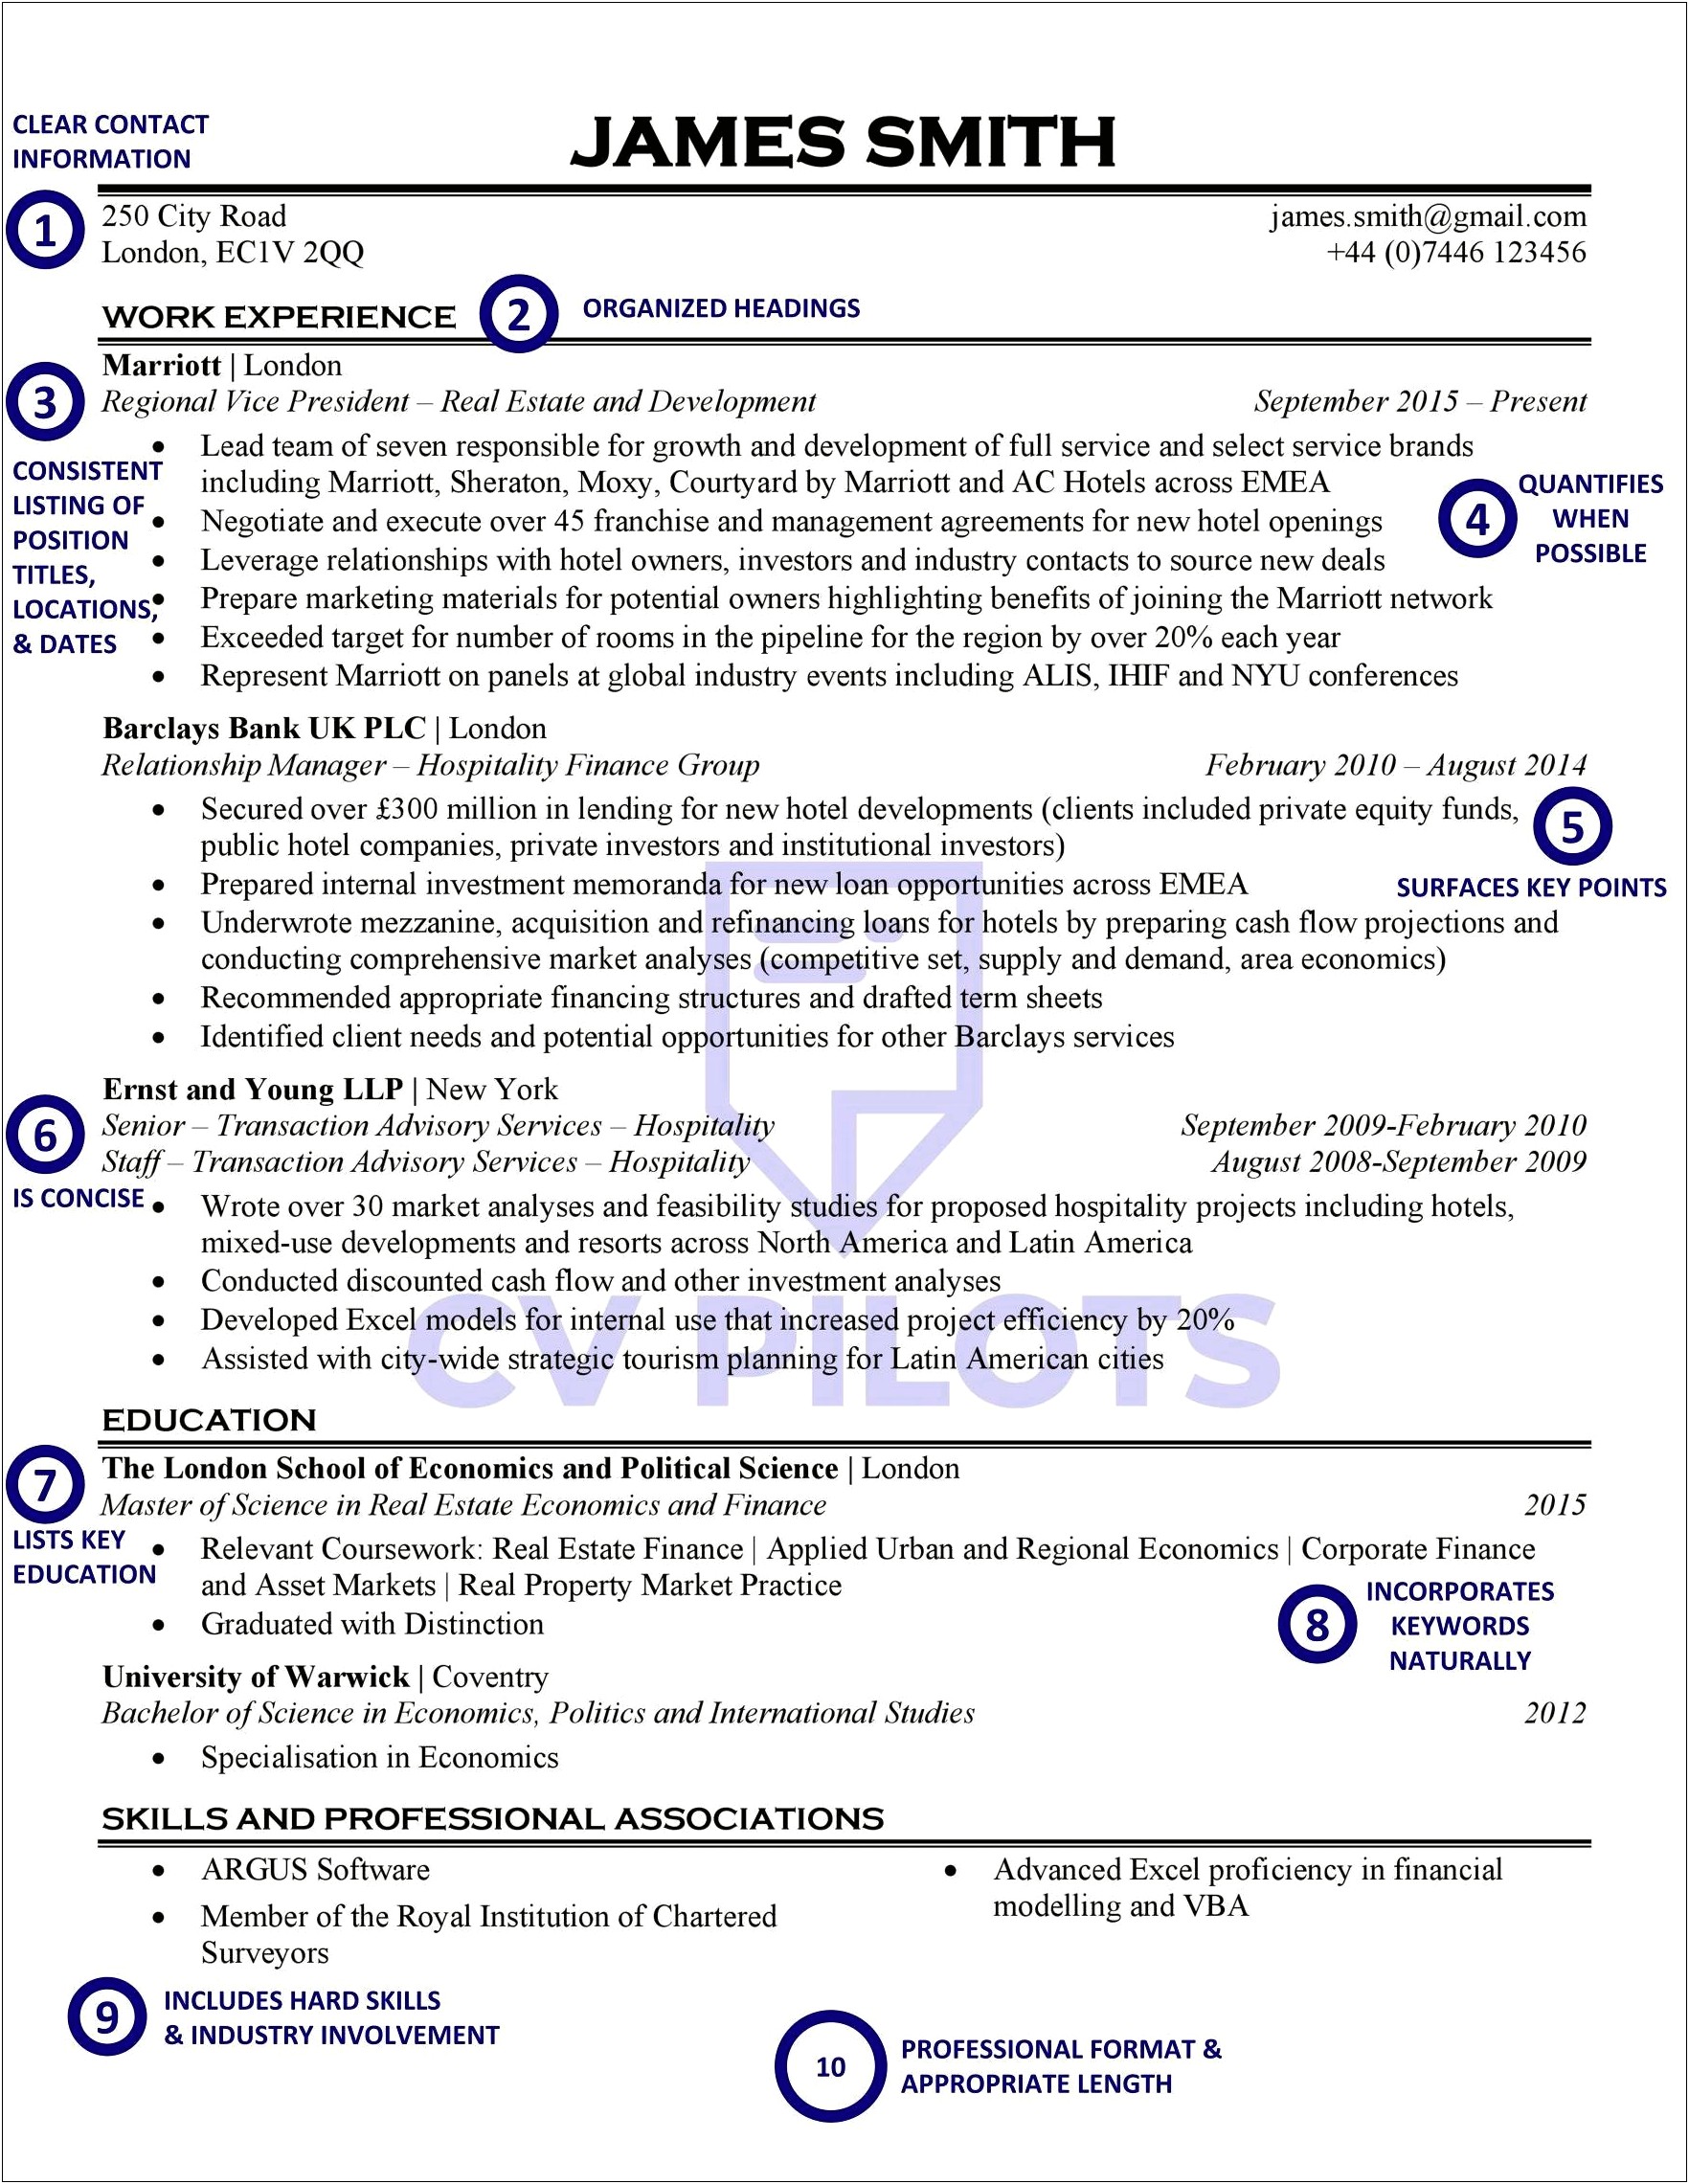 Vice President Communications Resume Best Practices 2019